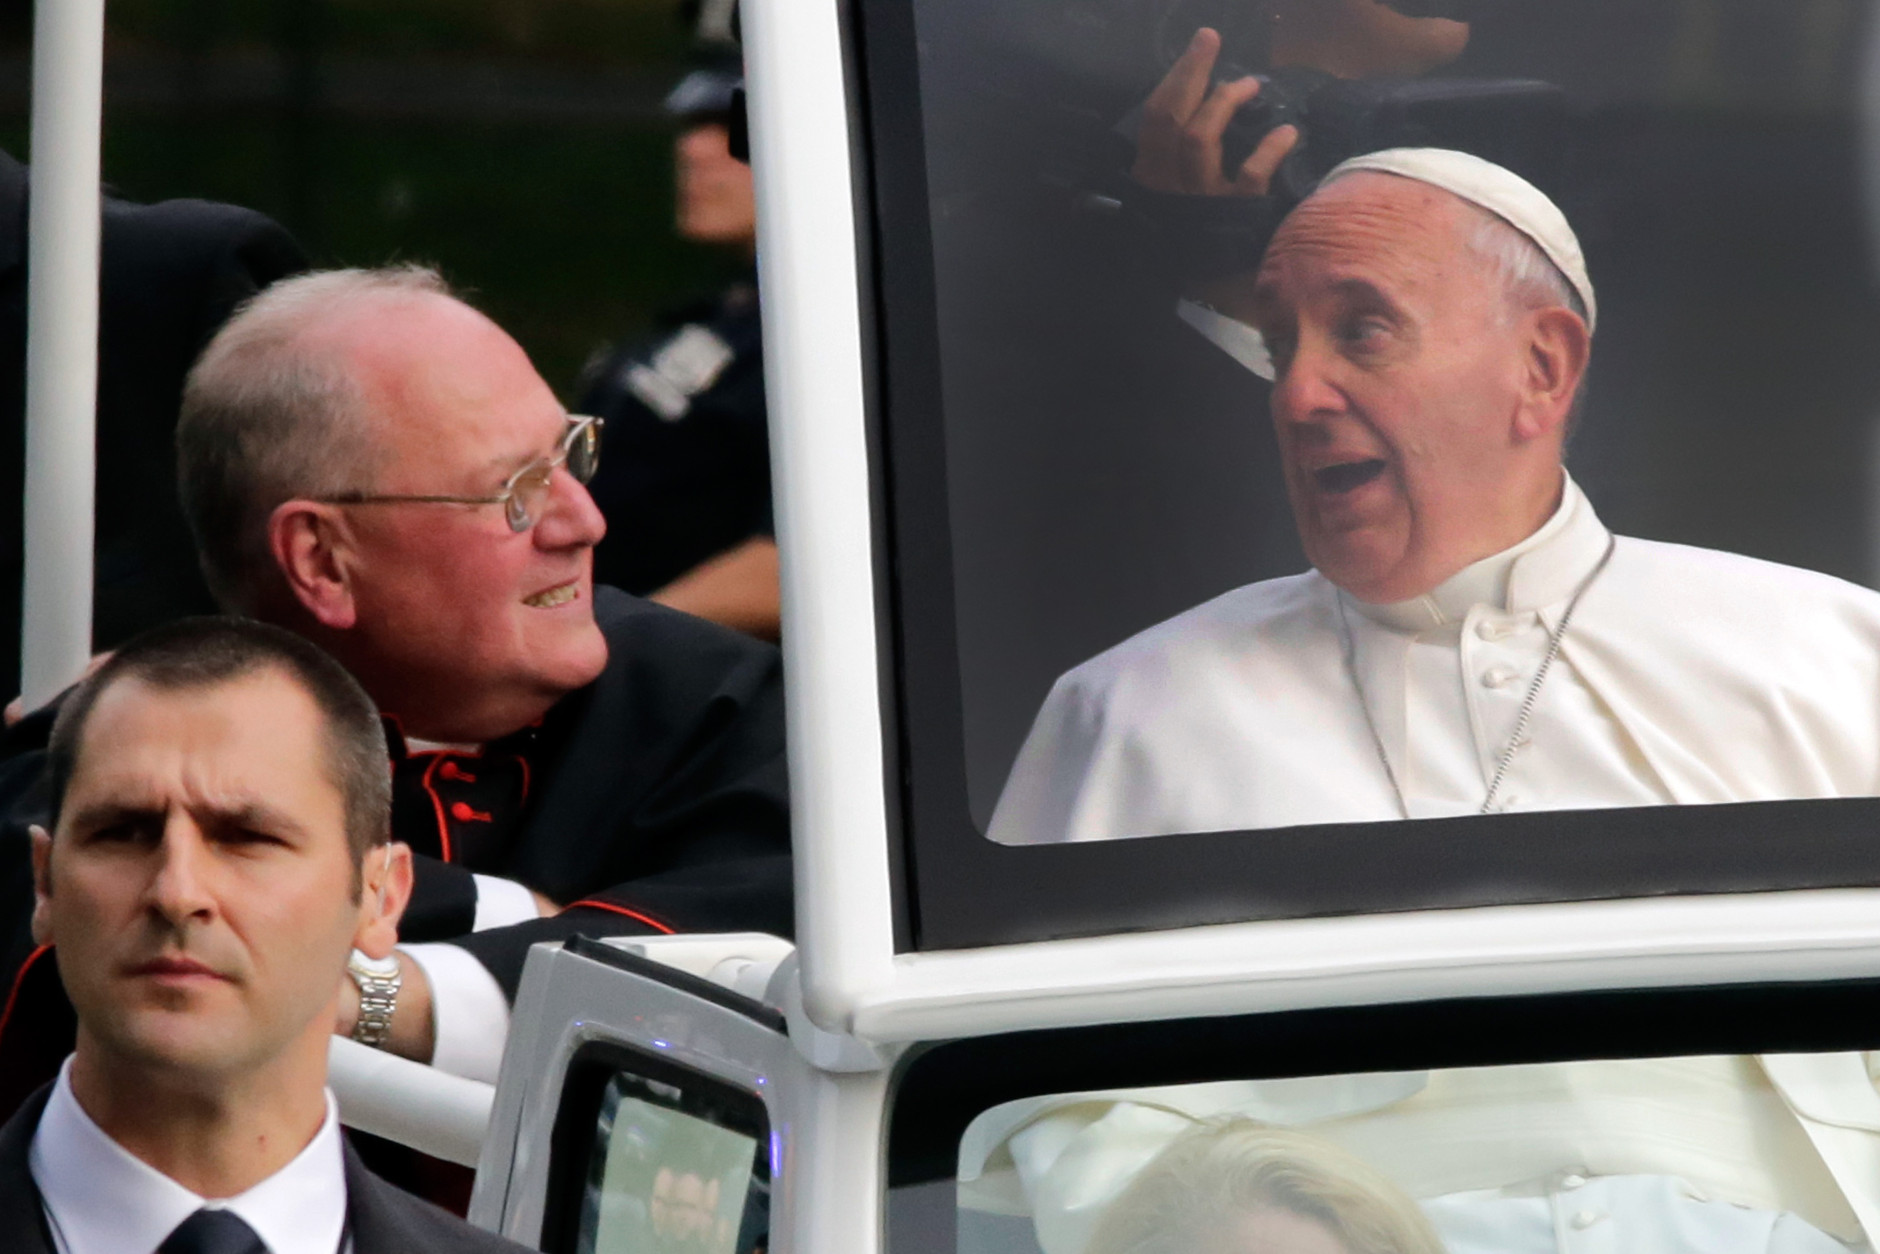 NEW YORK, NJ - SEPTEMBER 25:  Pope Francis and Cardinal Timothy Dolan (L) ride in the popemobile through Central Park September  25, 2015 in New York City. The pope is in New York on a two-day visit carrying out a number of engagements, including celebrating Mass in Madison Square Garden.   (Photo by Richard Drew-Pool/Getty Images)